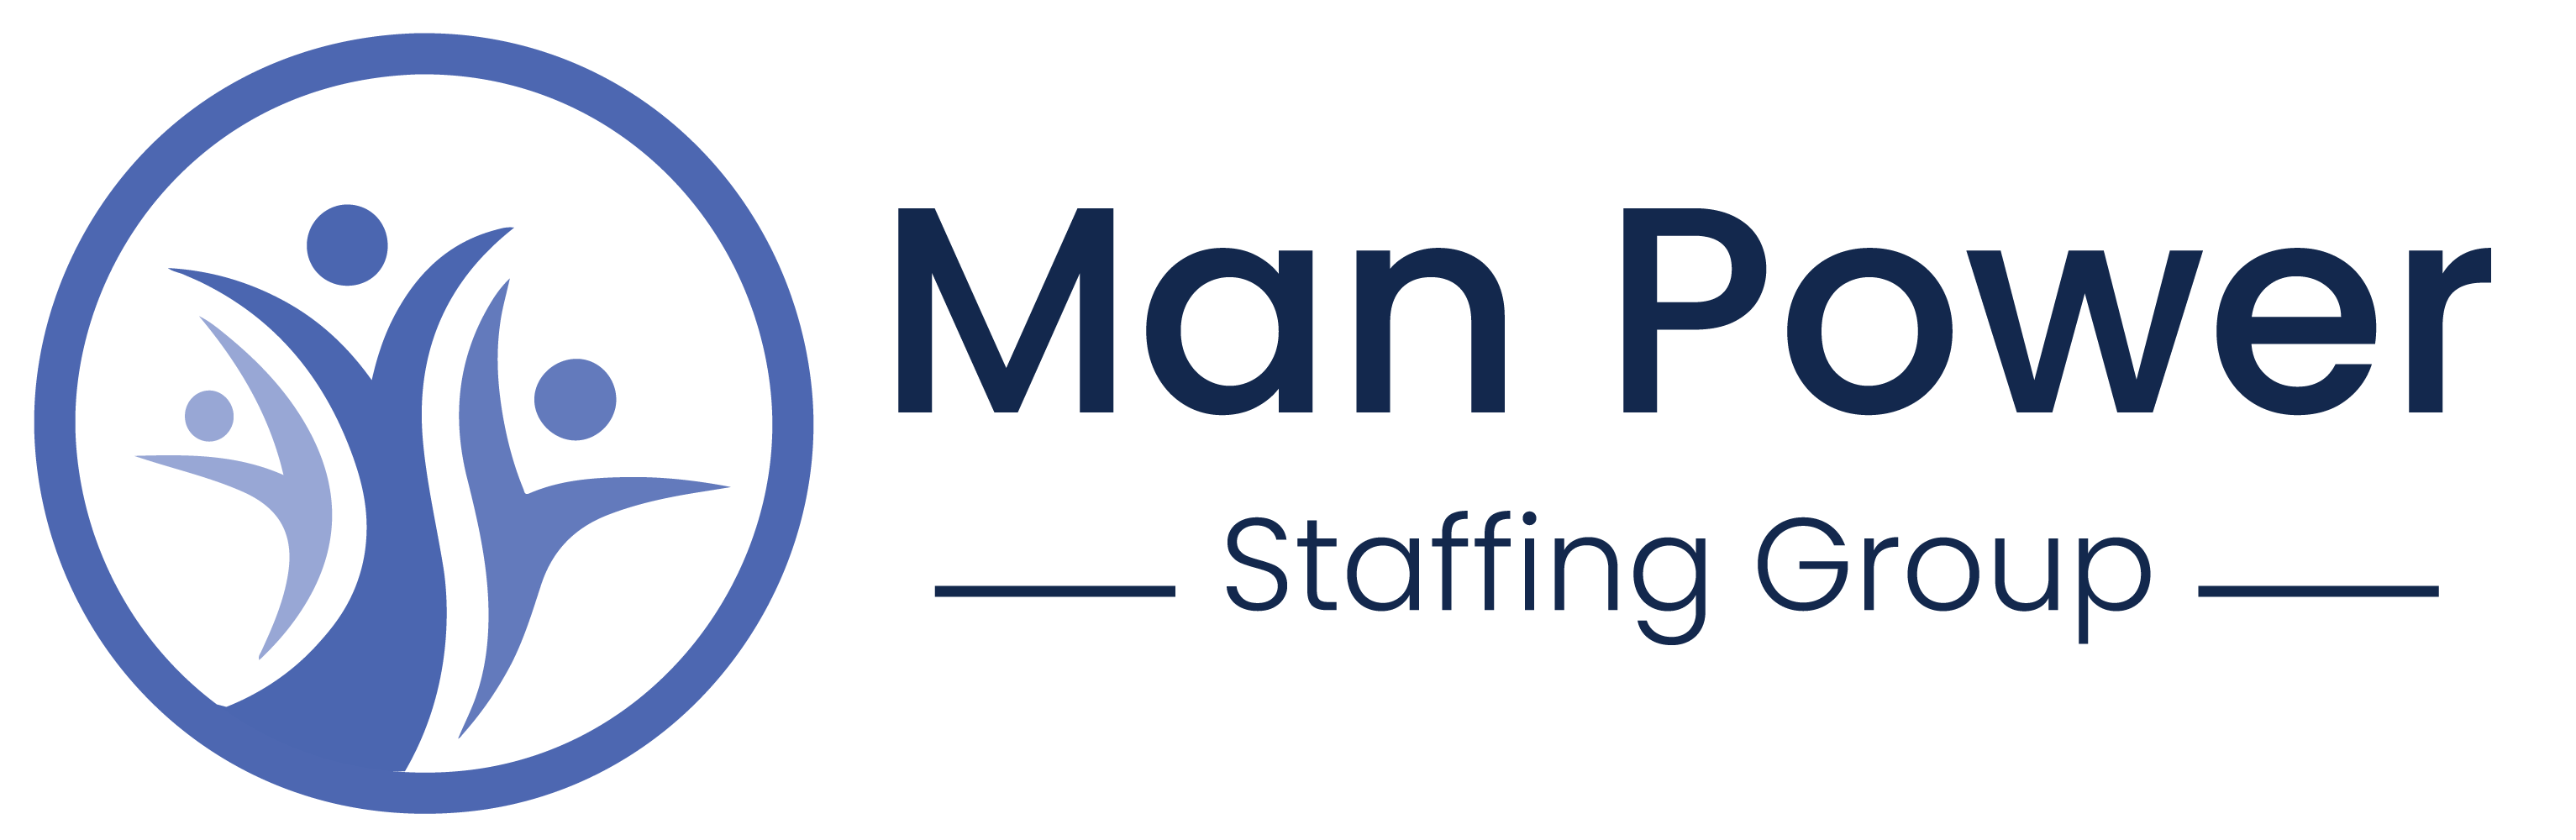 The Man Power Staffing Group